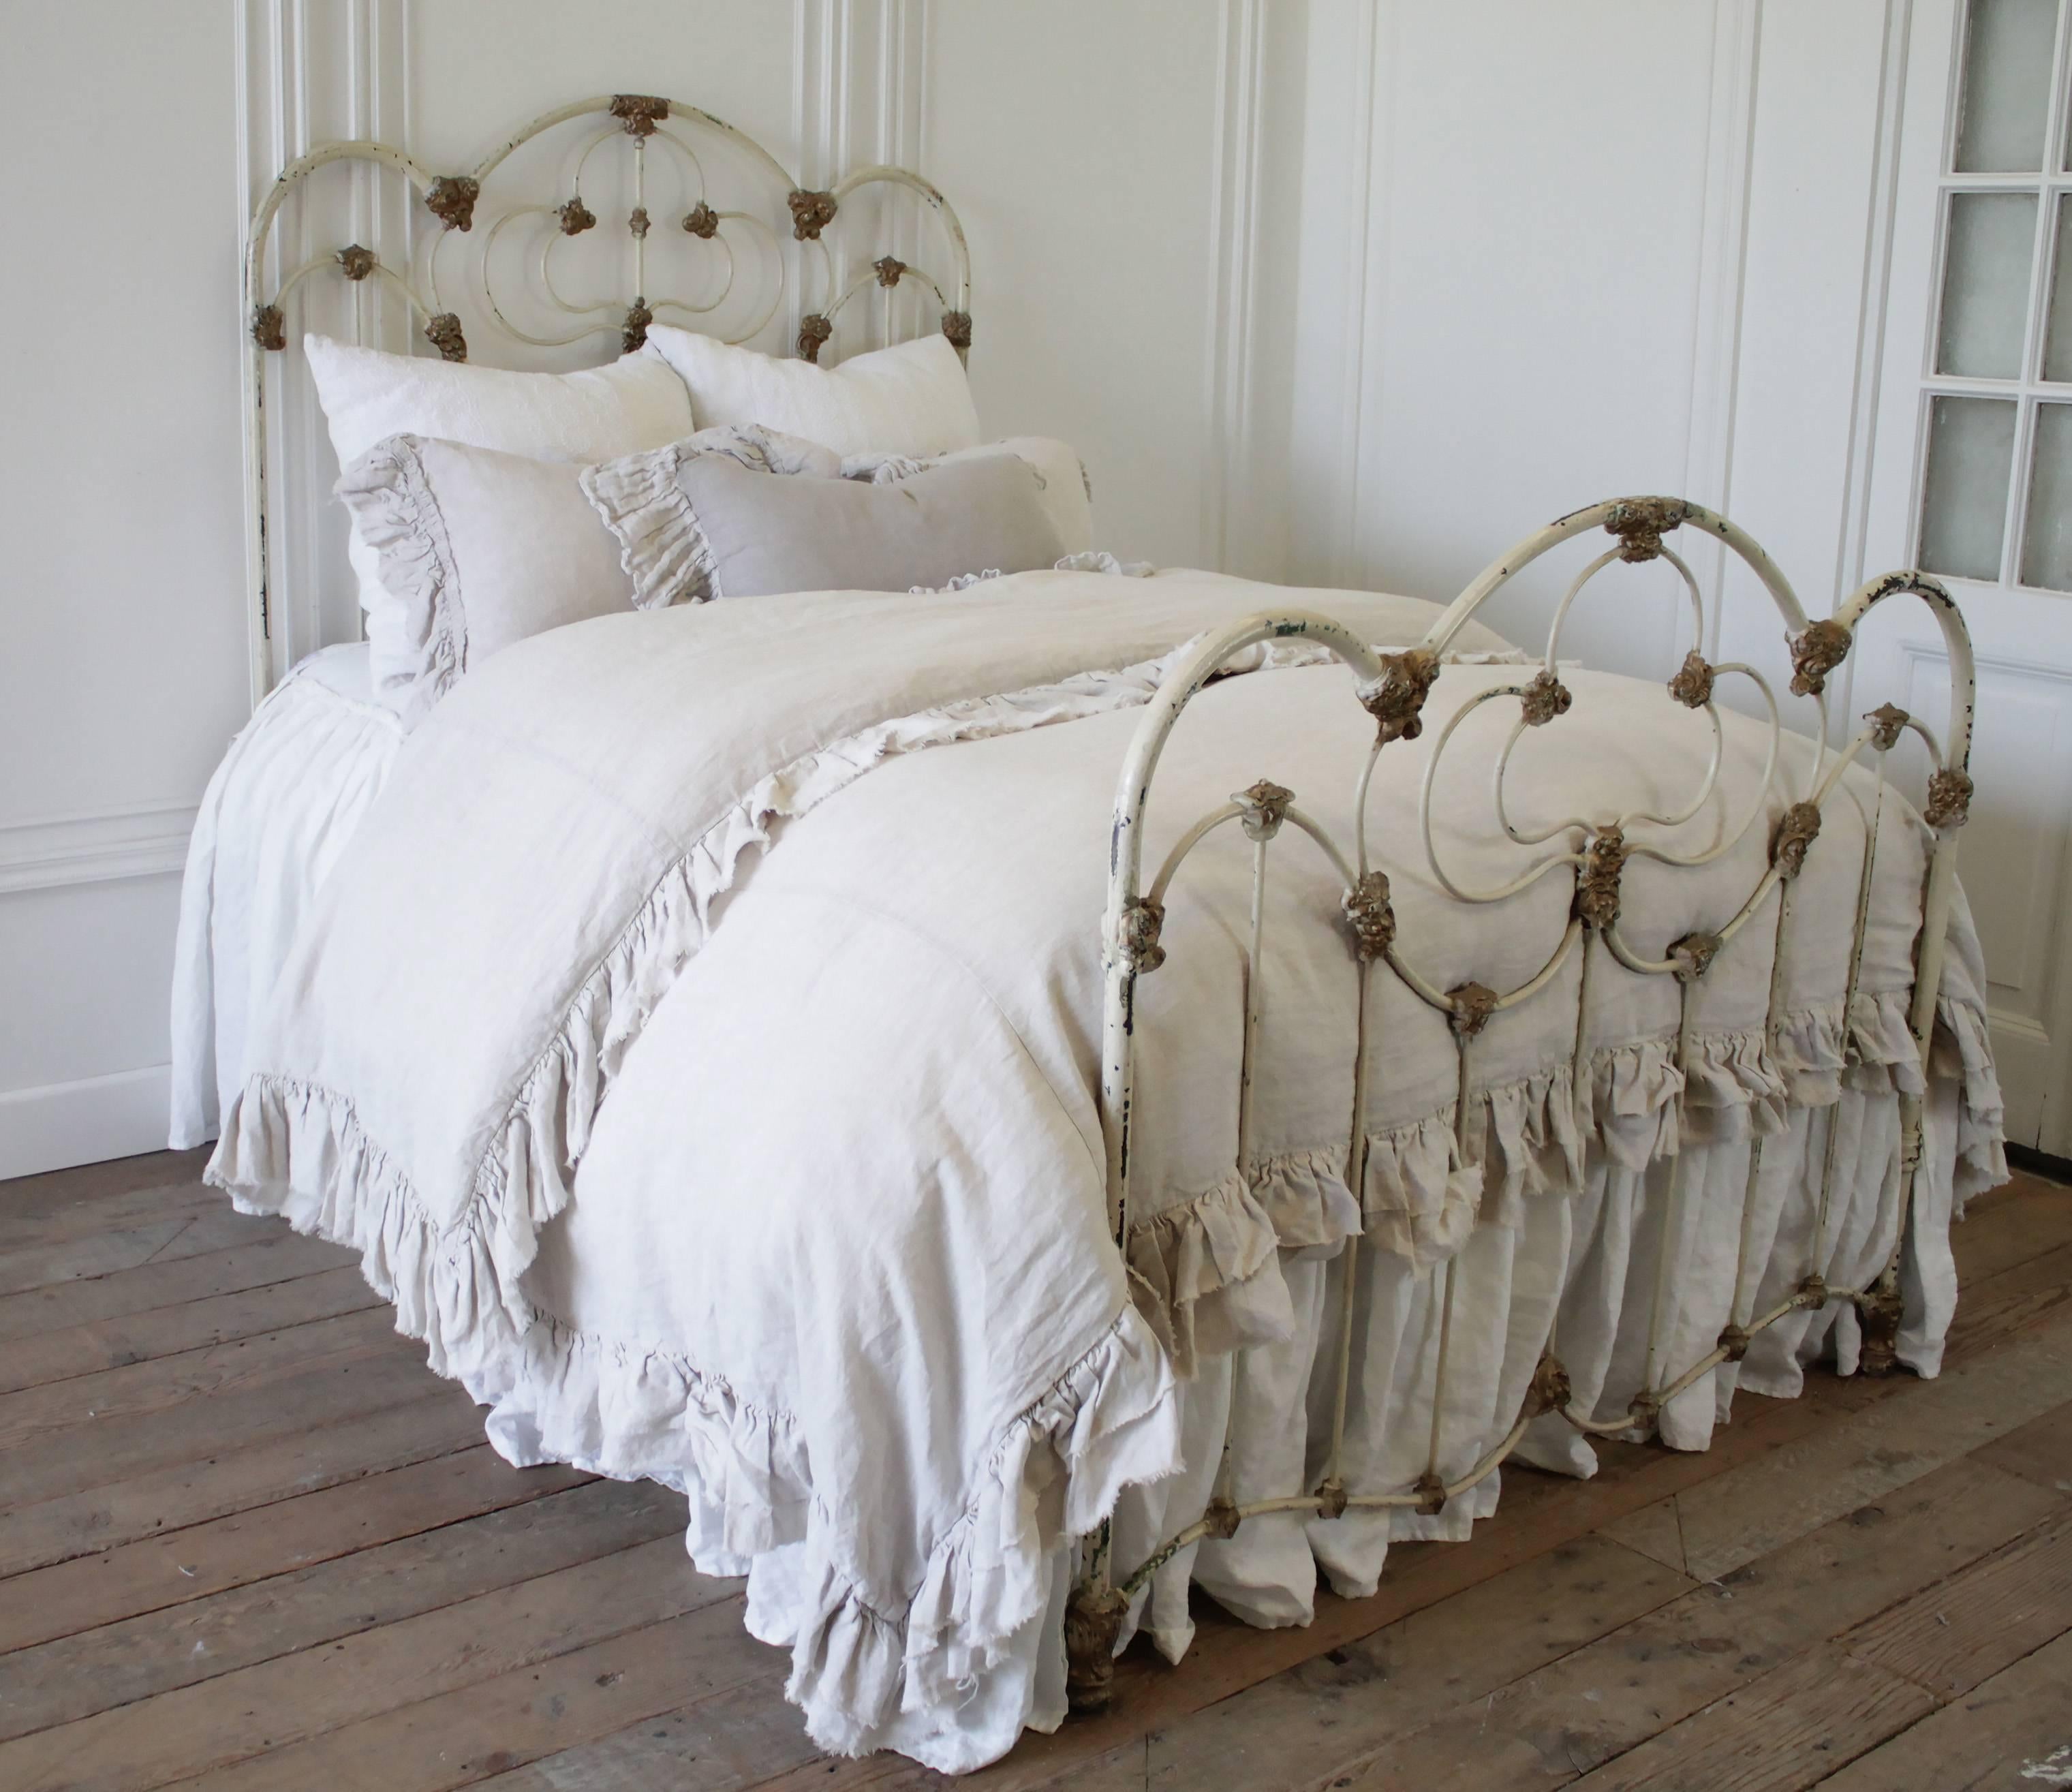 Beautiful French country antique iron bed painted in a soft creamy white finish, and gold accents. Solid iron, this bed fits a full size mattress. Layers of paint, chipping to reveal colors that once adorned this bed, creating a fabulous patina that